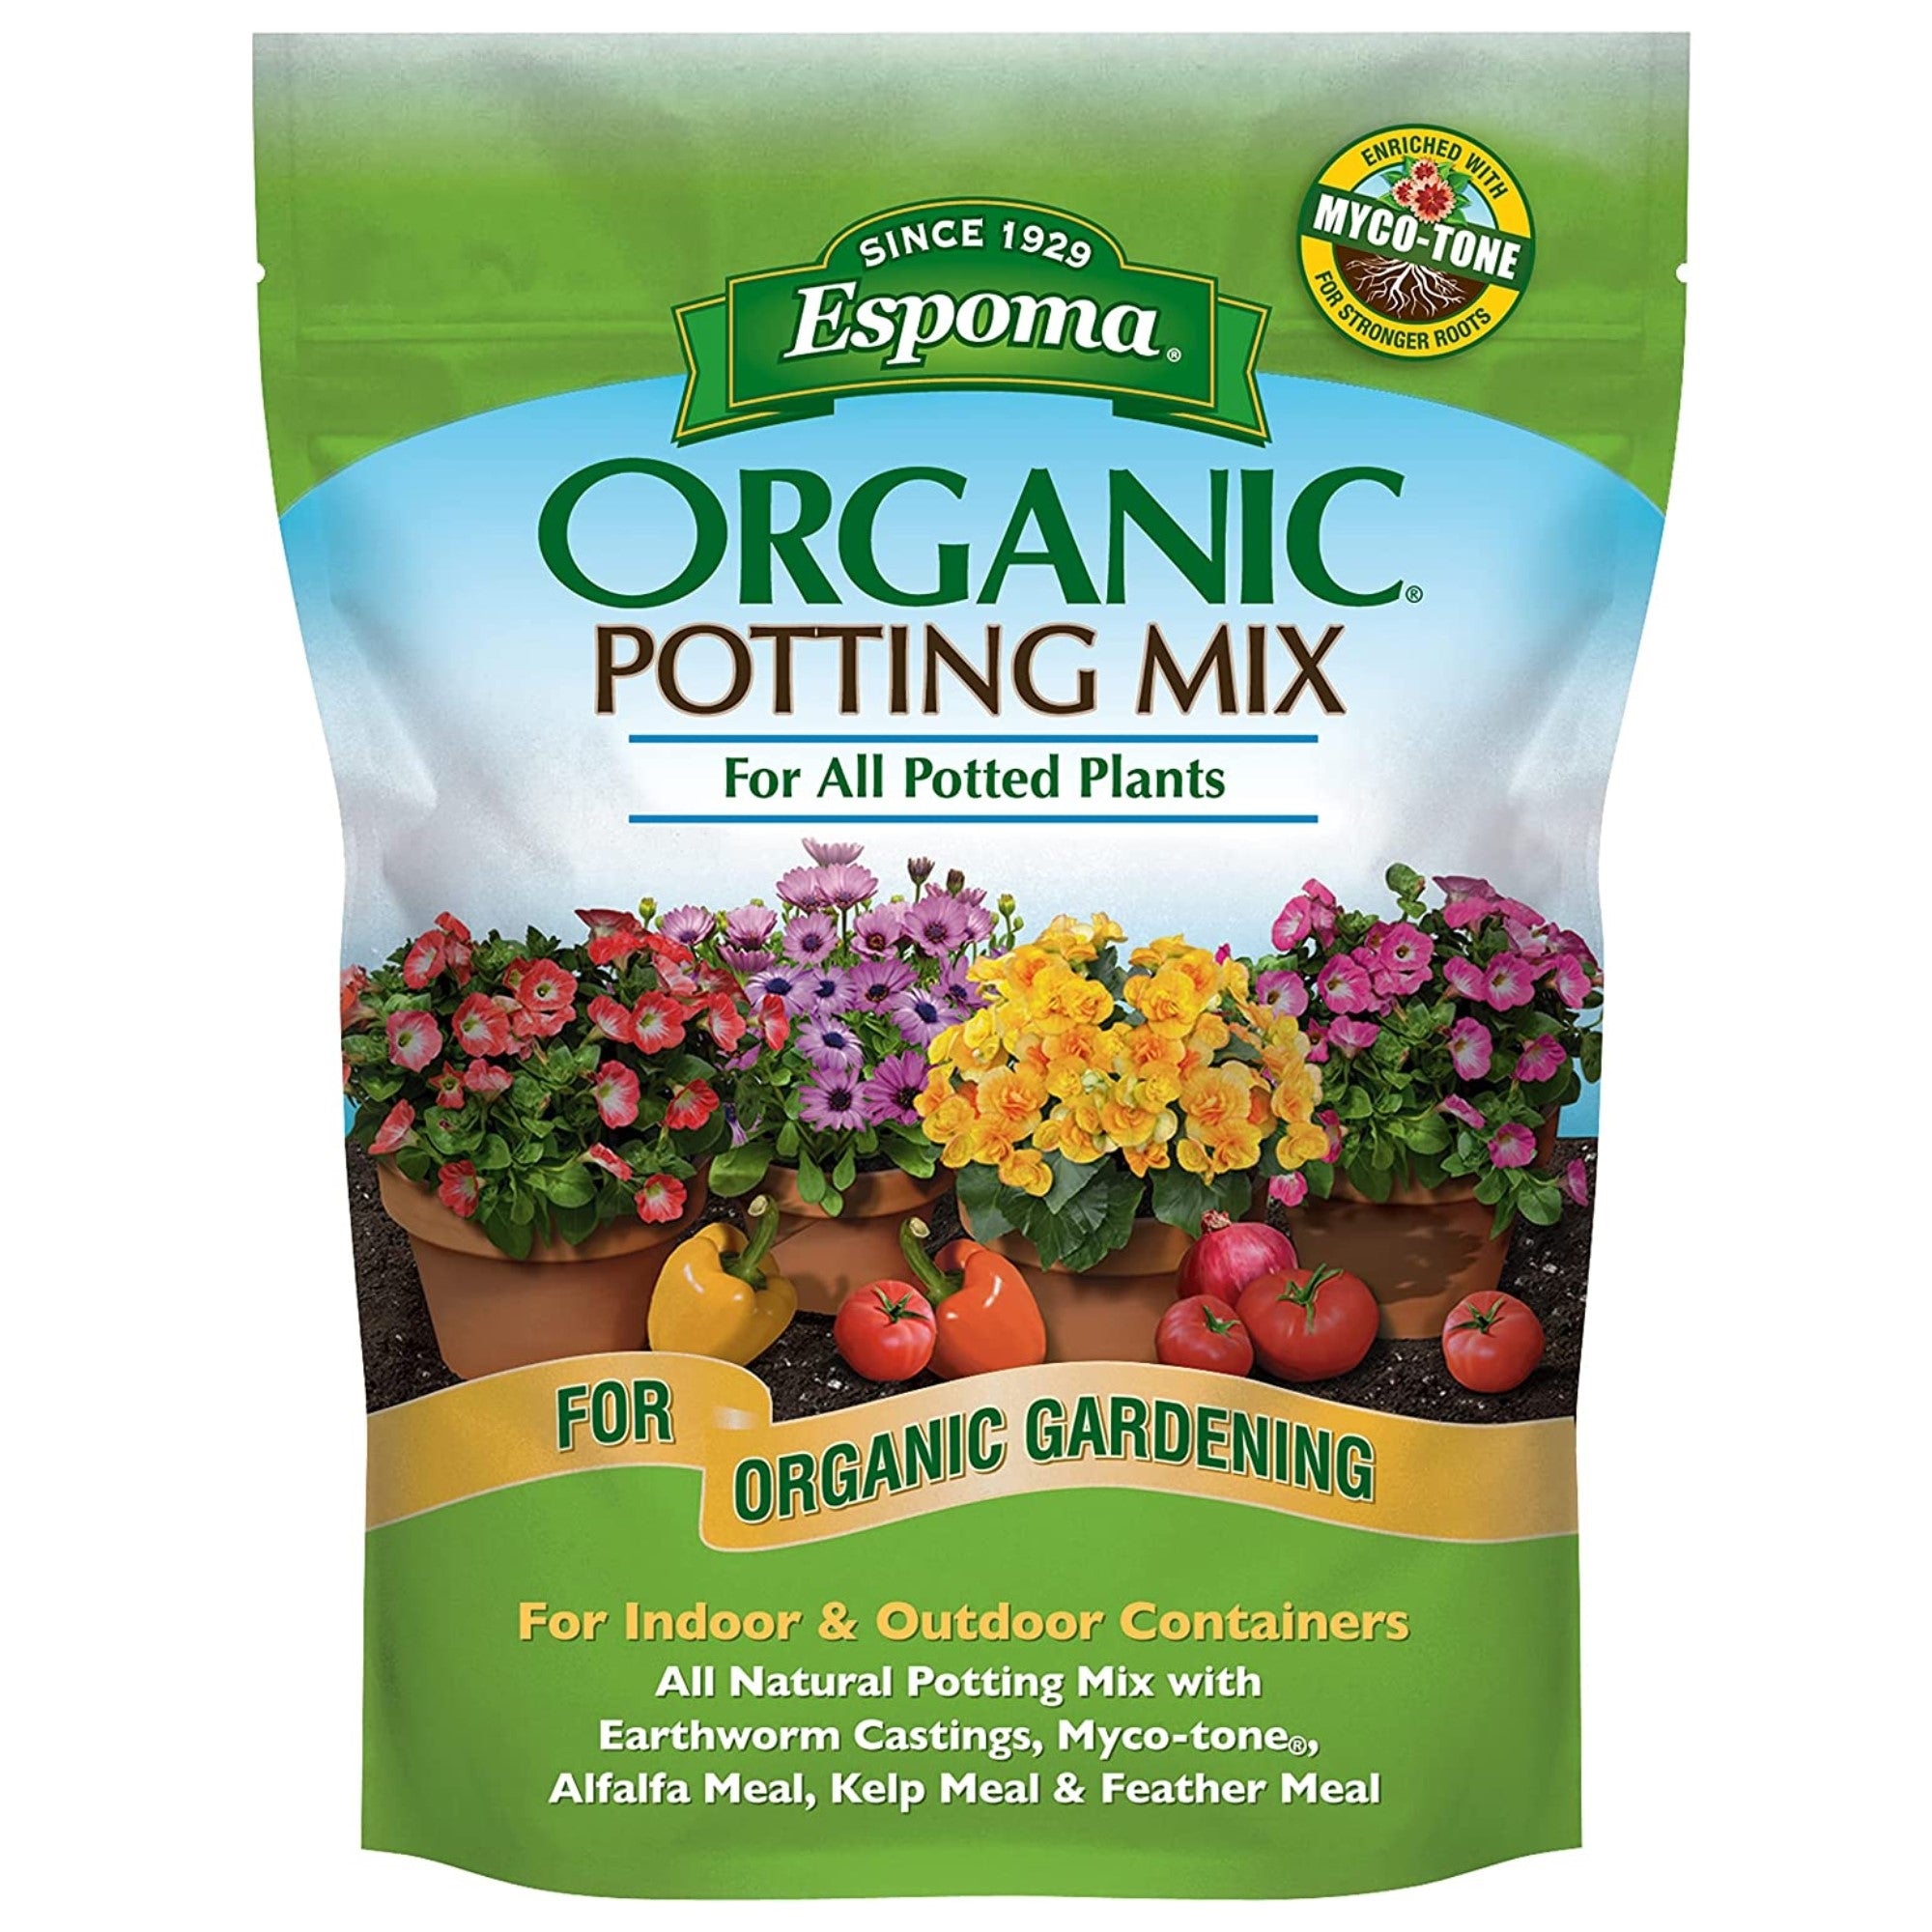 Espoma Organic Potting Mix for Potted Plants, All Natural for Organic Gardening - for Indoor & Outdoor Containers